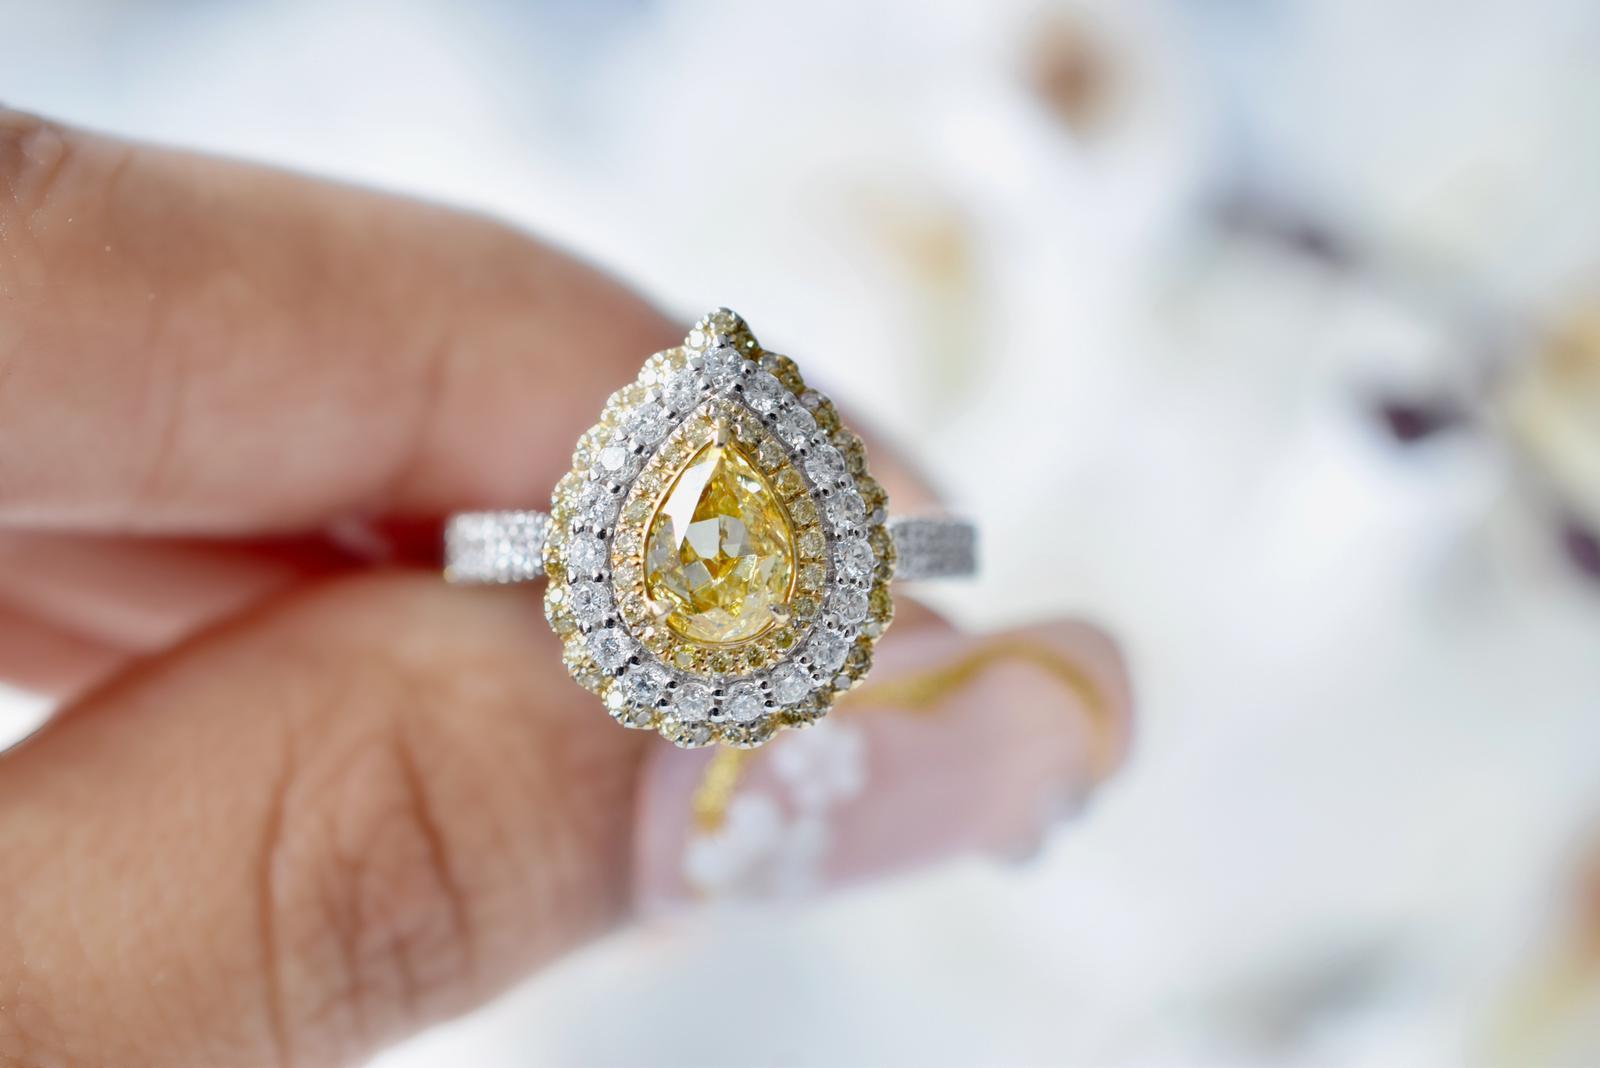 **100% NATURAL FANCY COLOUR DIAMOND JEWELLERIES**

✪ Jewelry Details ✪

♦ MAIN STONE DETAILS

➛ Stone Shape: Pear
➛ Stone Color: Fancy Light Yellow
➛ Stone Weight: 0.68 carats
➛ GIA certified

♦ SIDE STONE DETAILS 

➛ Side Yellow diamonds - 59 pcs